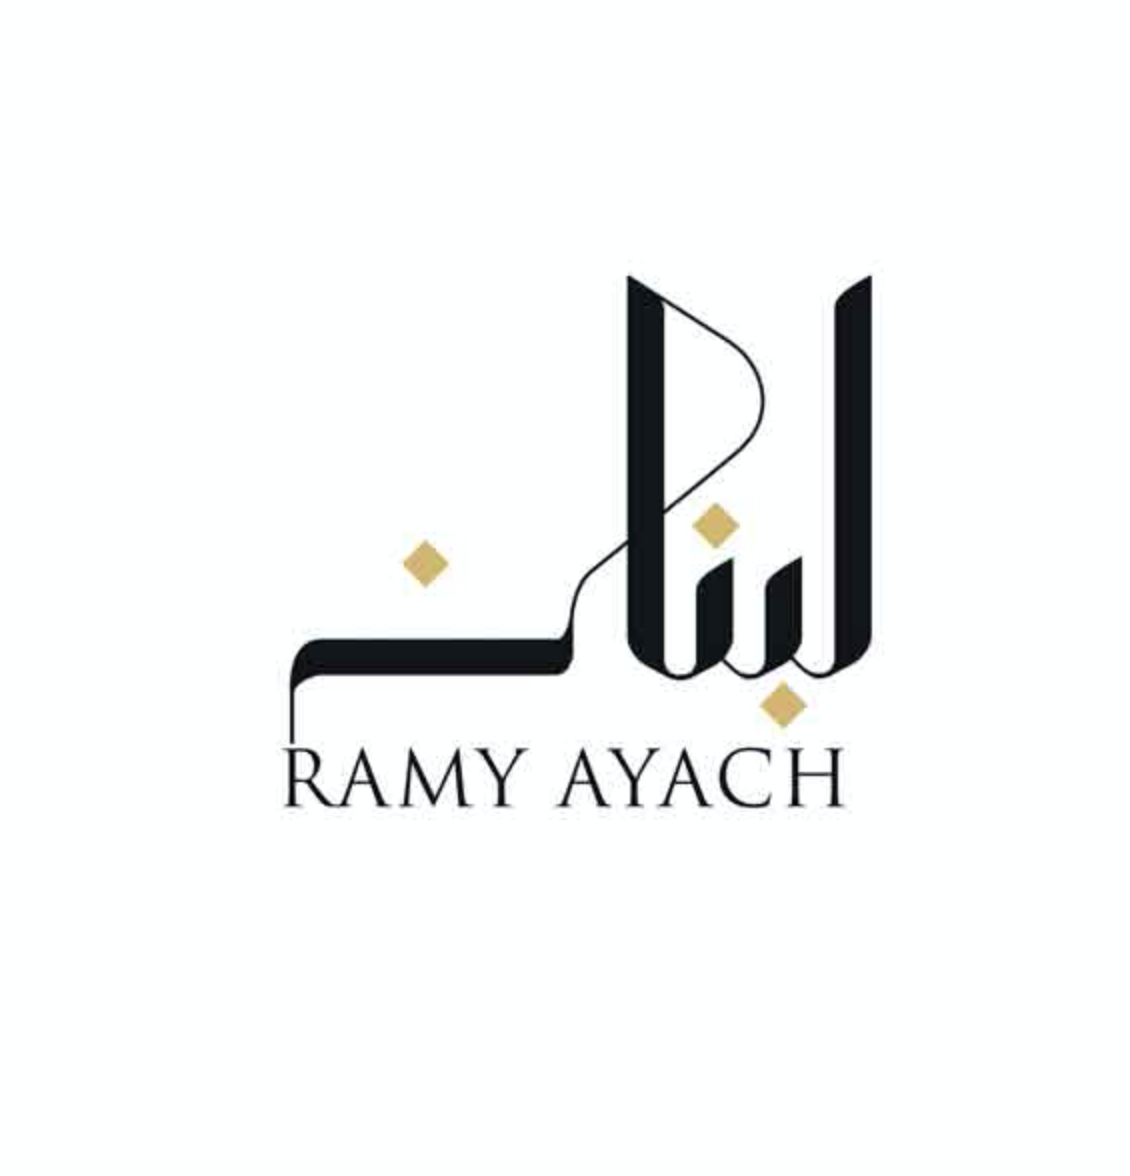 Branding agency specializing in logo design, campaign and graphic design, 2D animation, and content creation, based in Lebanon.